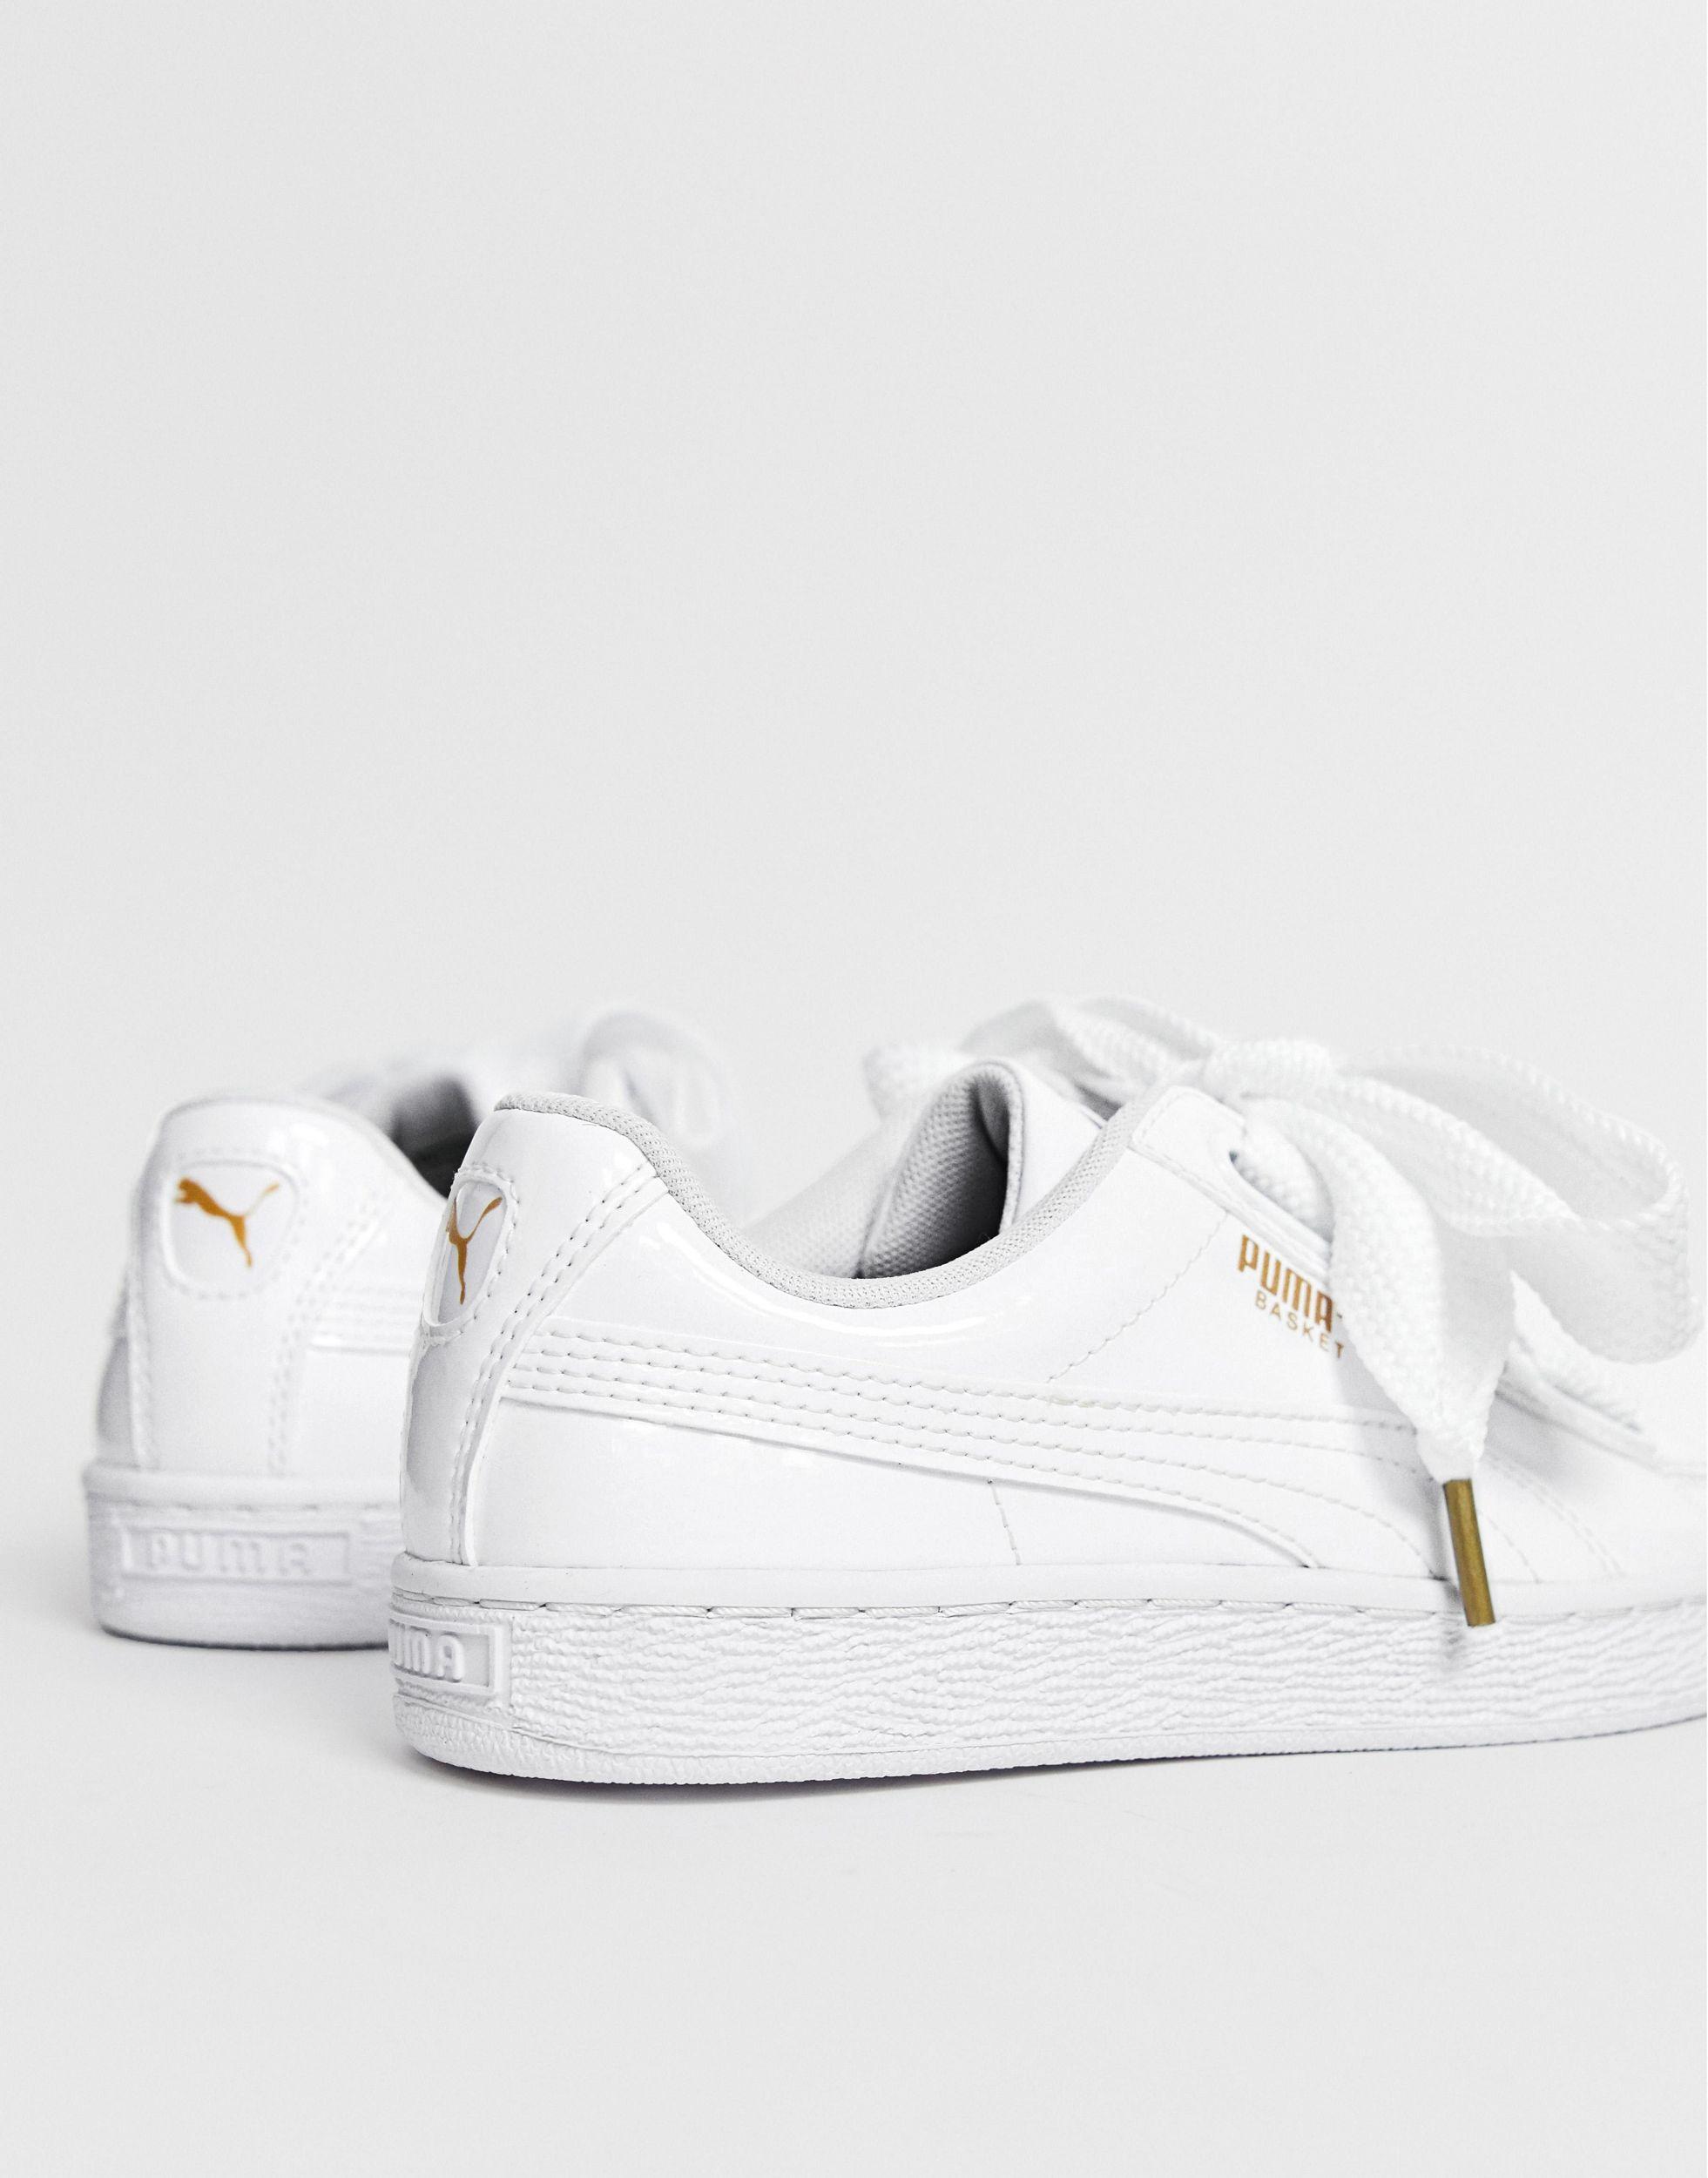 PUMA Rubber Patent Basket Heart Trainer in White - Lyst